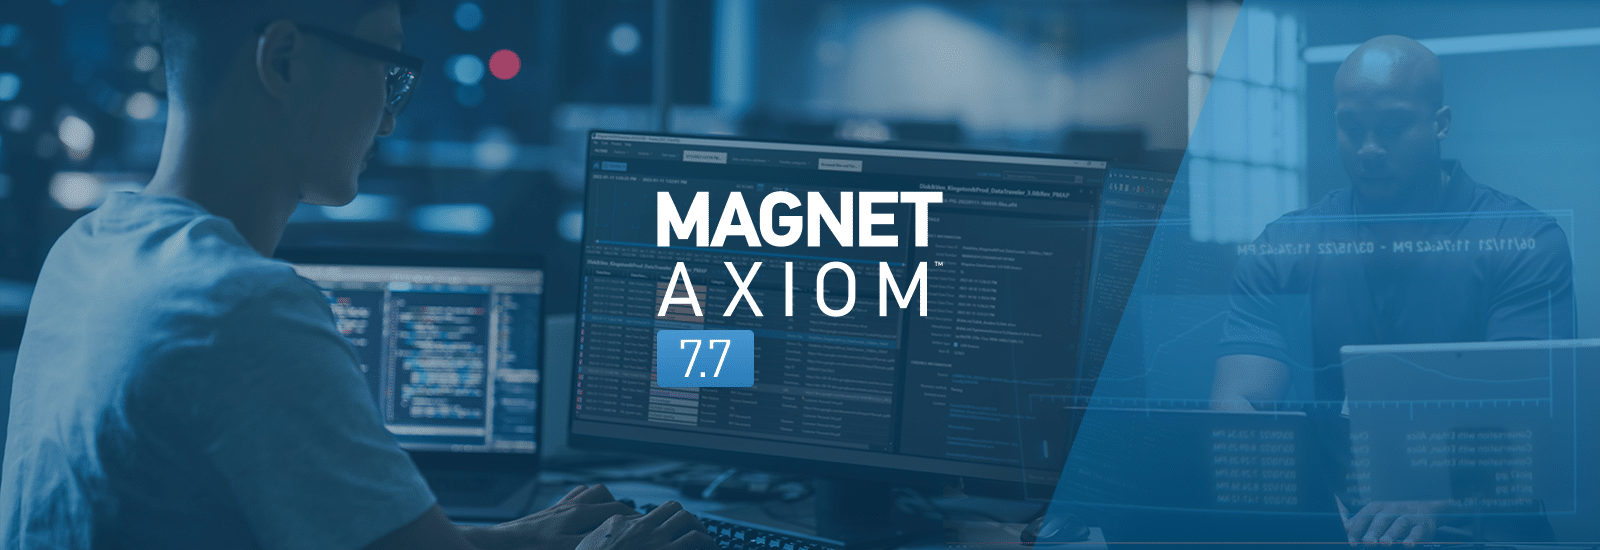 A decorative header for the Magnet AXIOM 7.7 release.